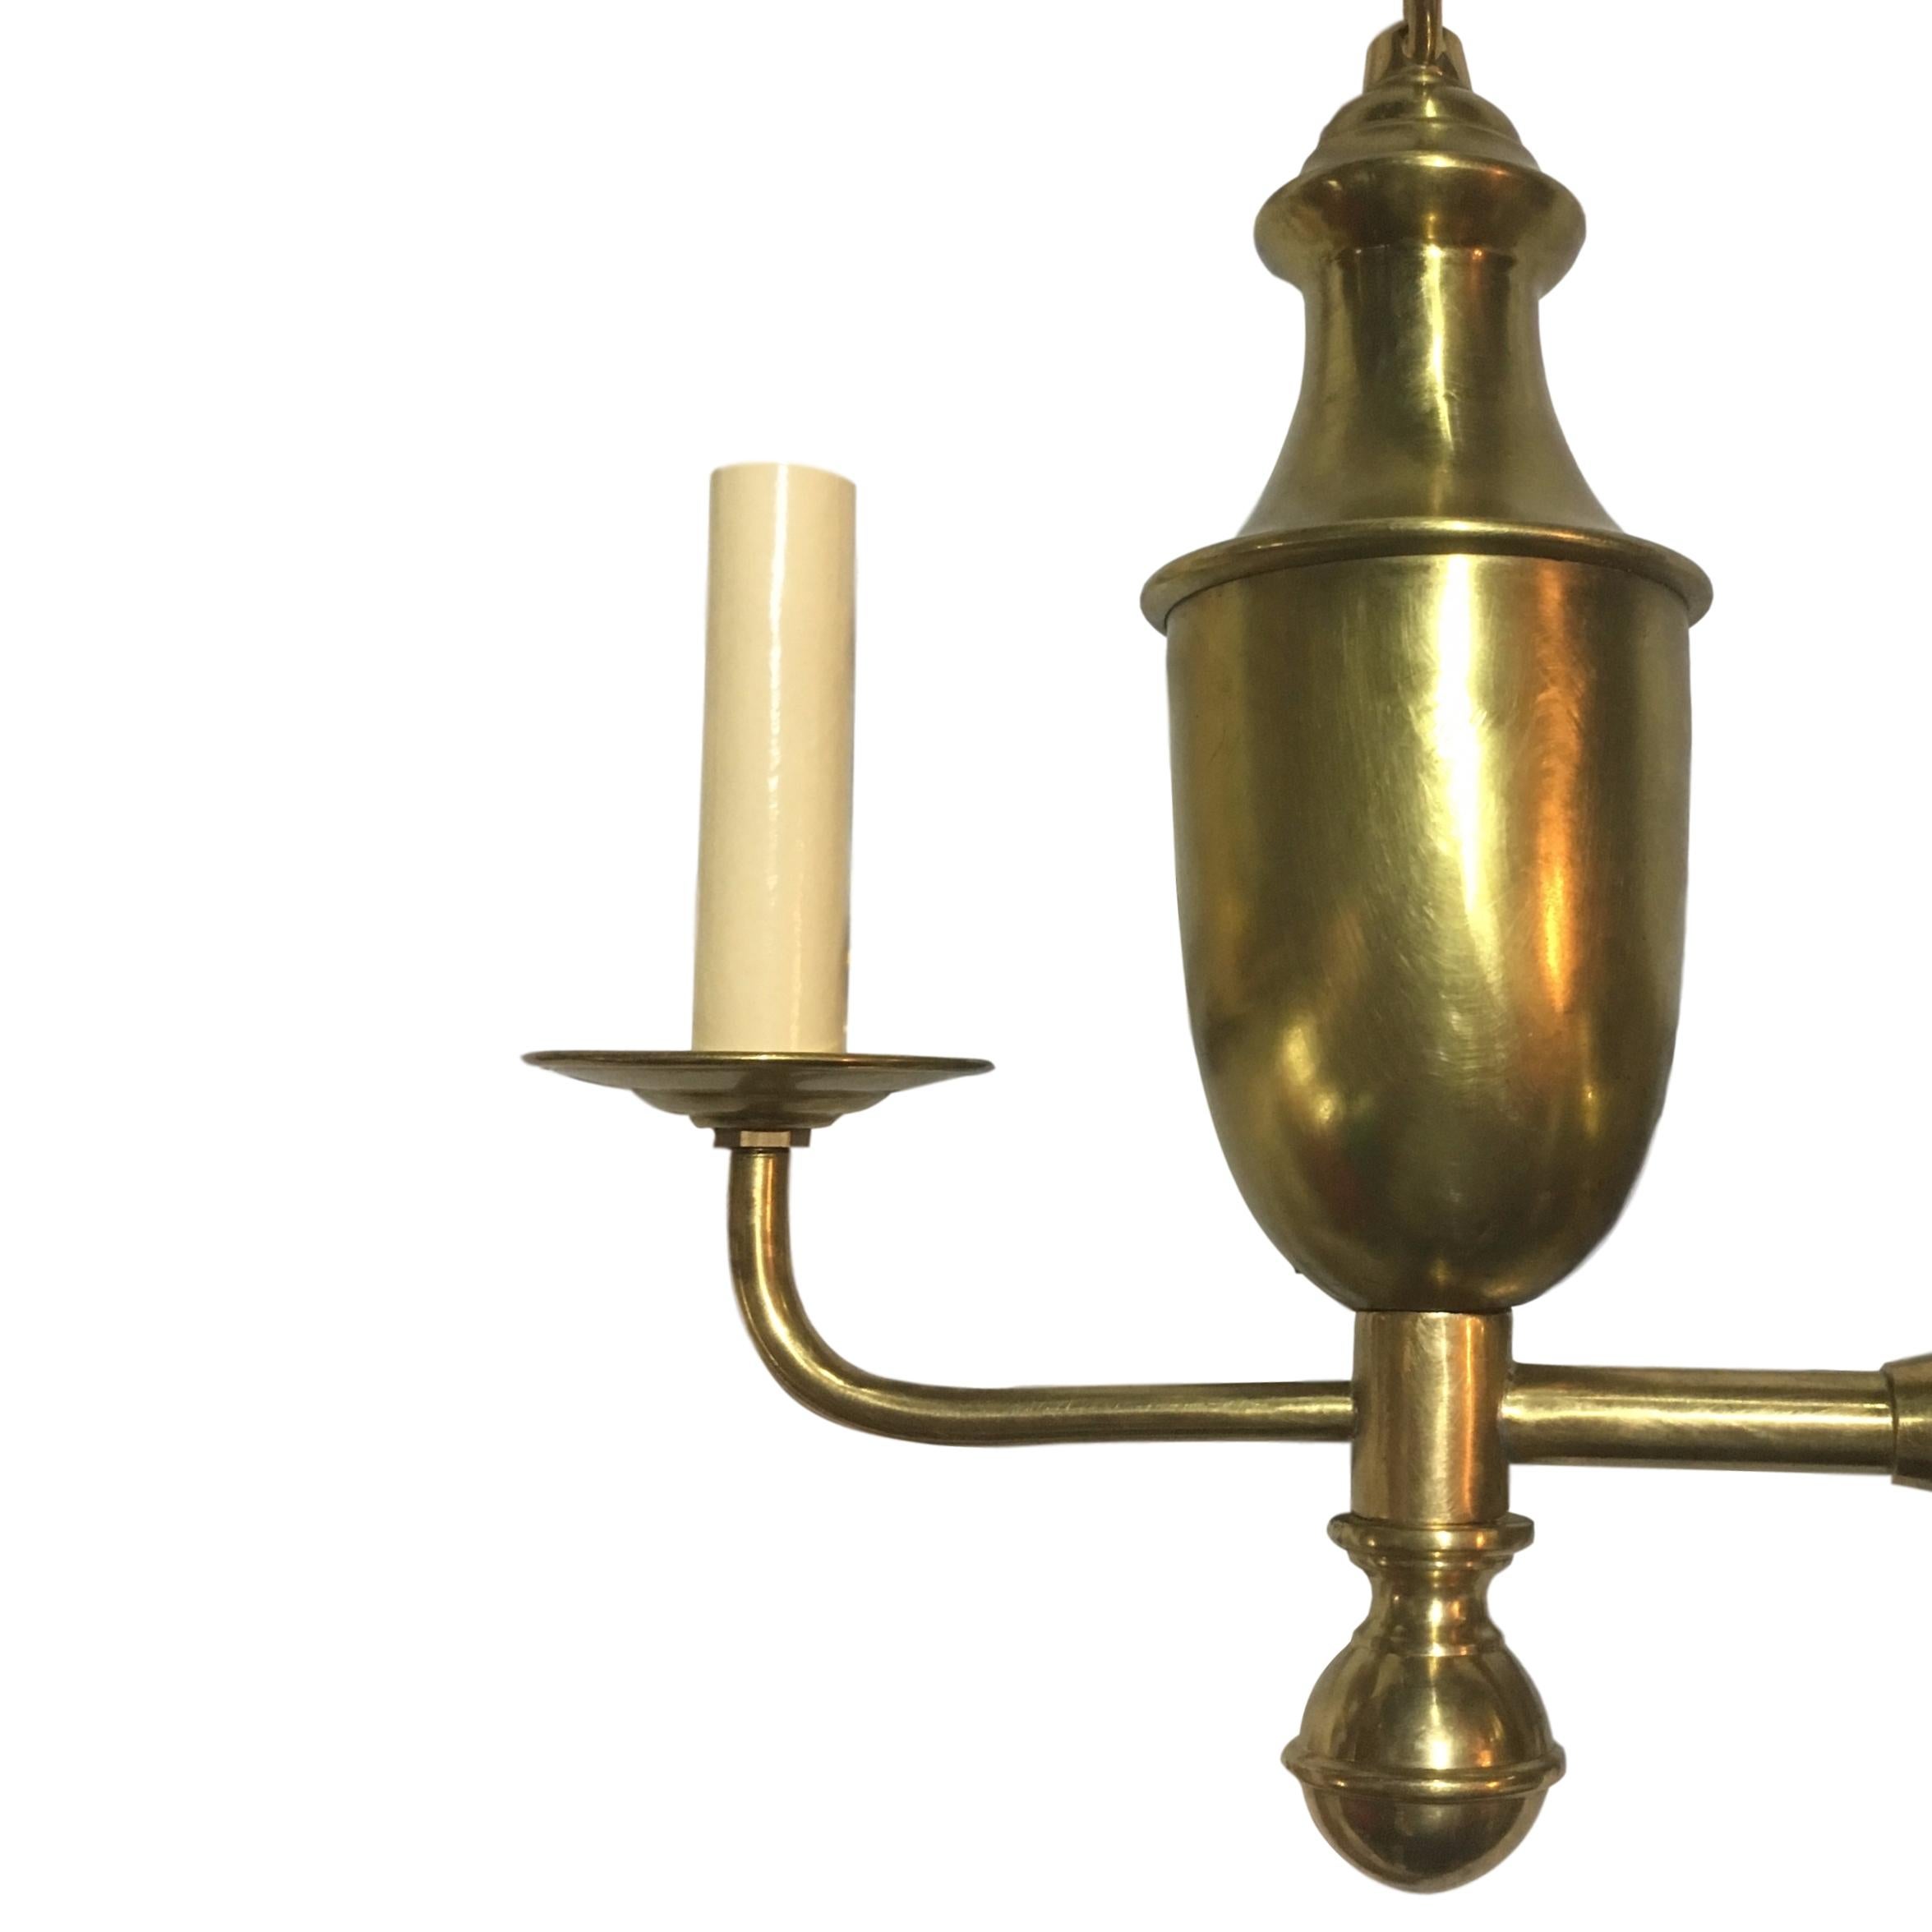 A pair of French single-light sconces, circa 1940s

Measurements:
Height: 13